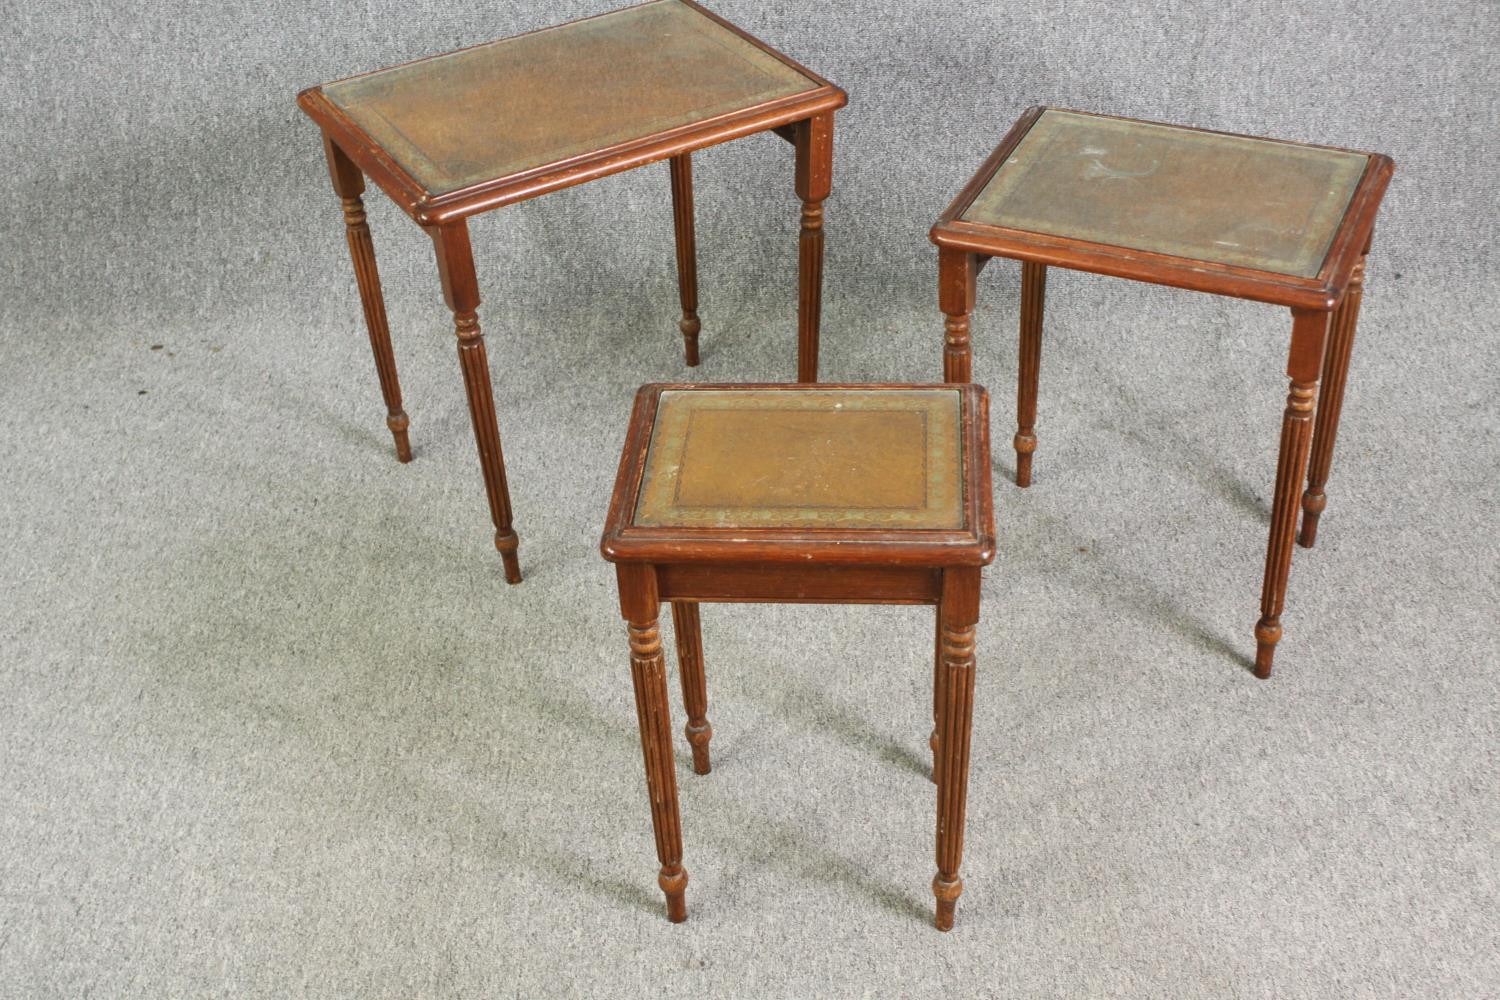 A nest of three mahogany tables with leather and glass inset tops H.58 W.53 D.40cm. (largest). - Image 4 of 6